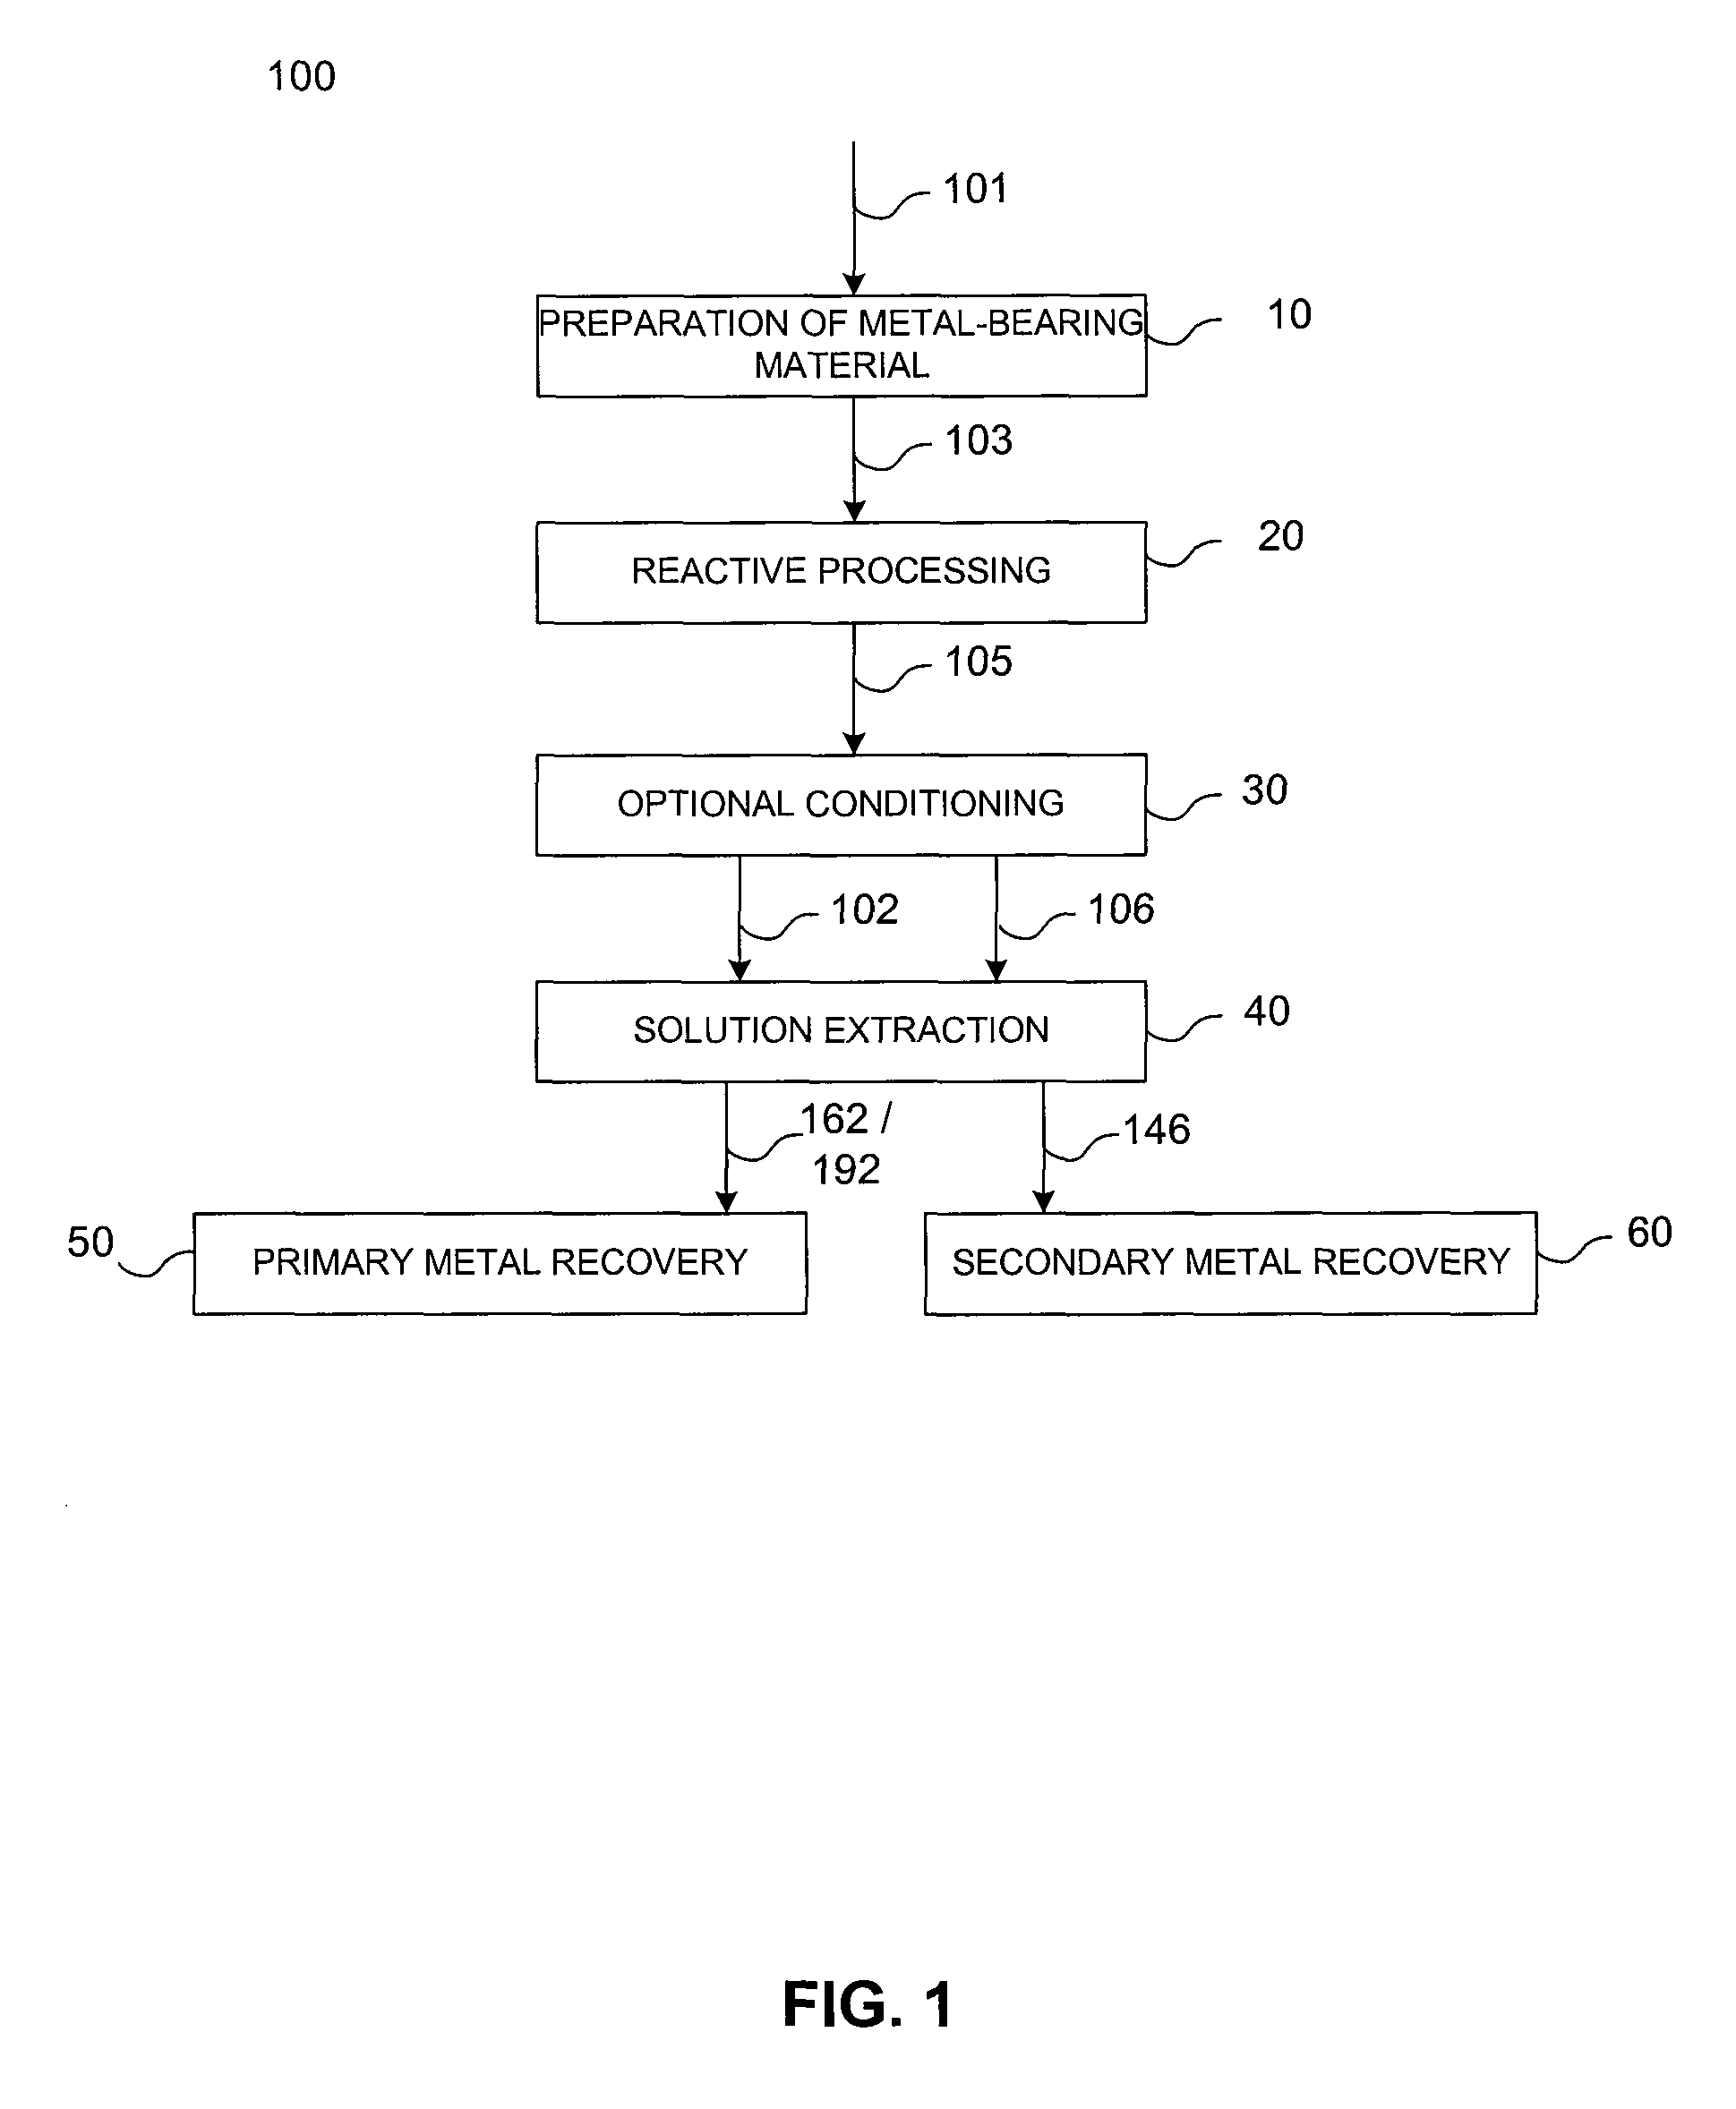 System and method including multi-circuit solution extraction for recovery of metal values from metal-bearing materials